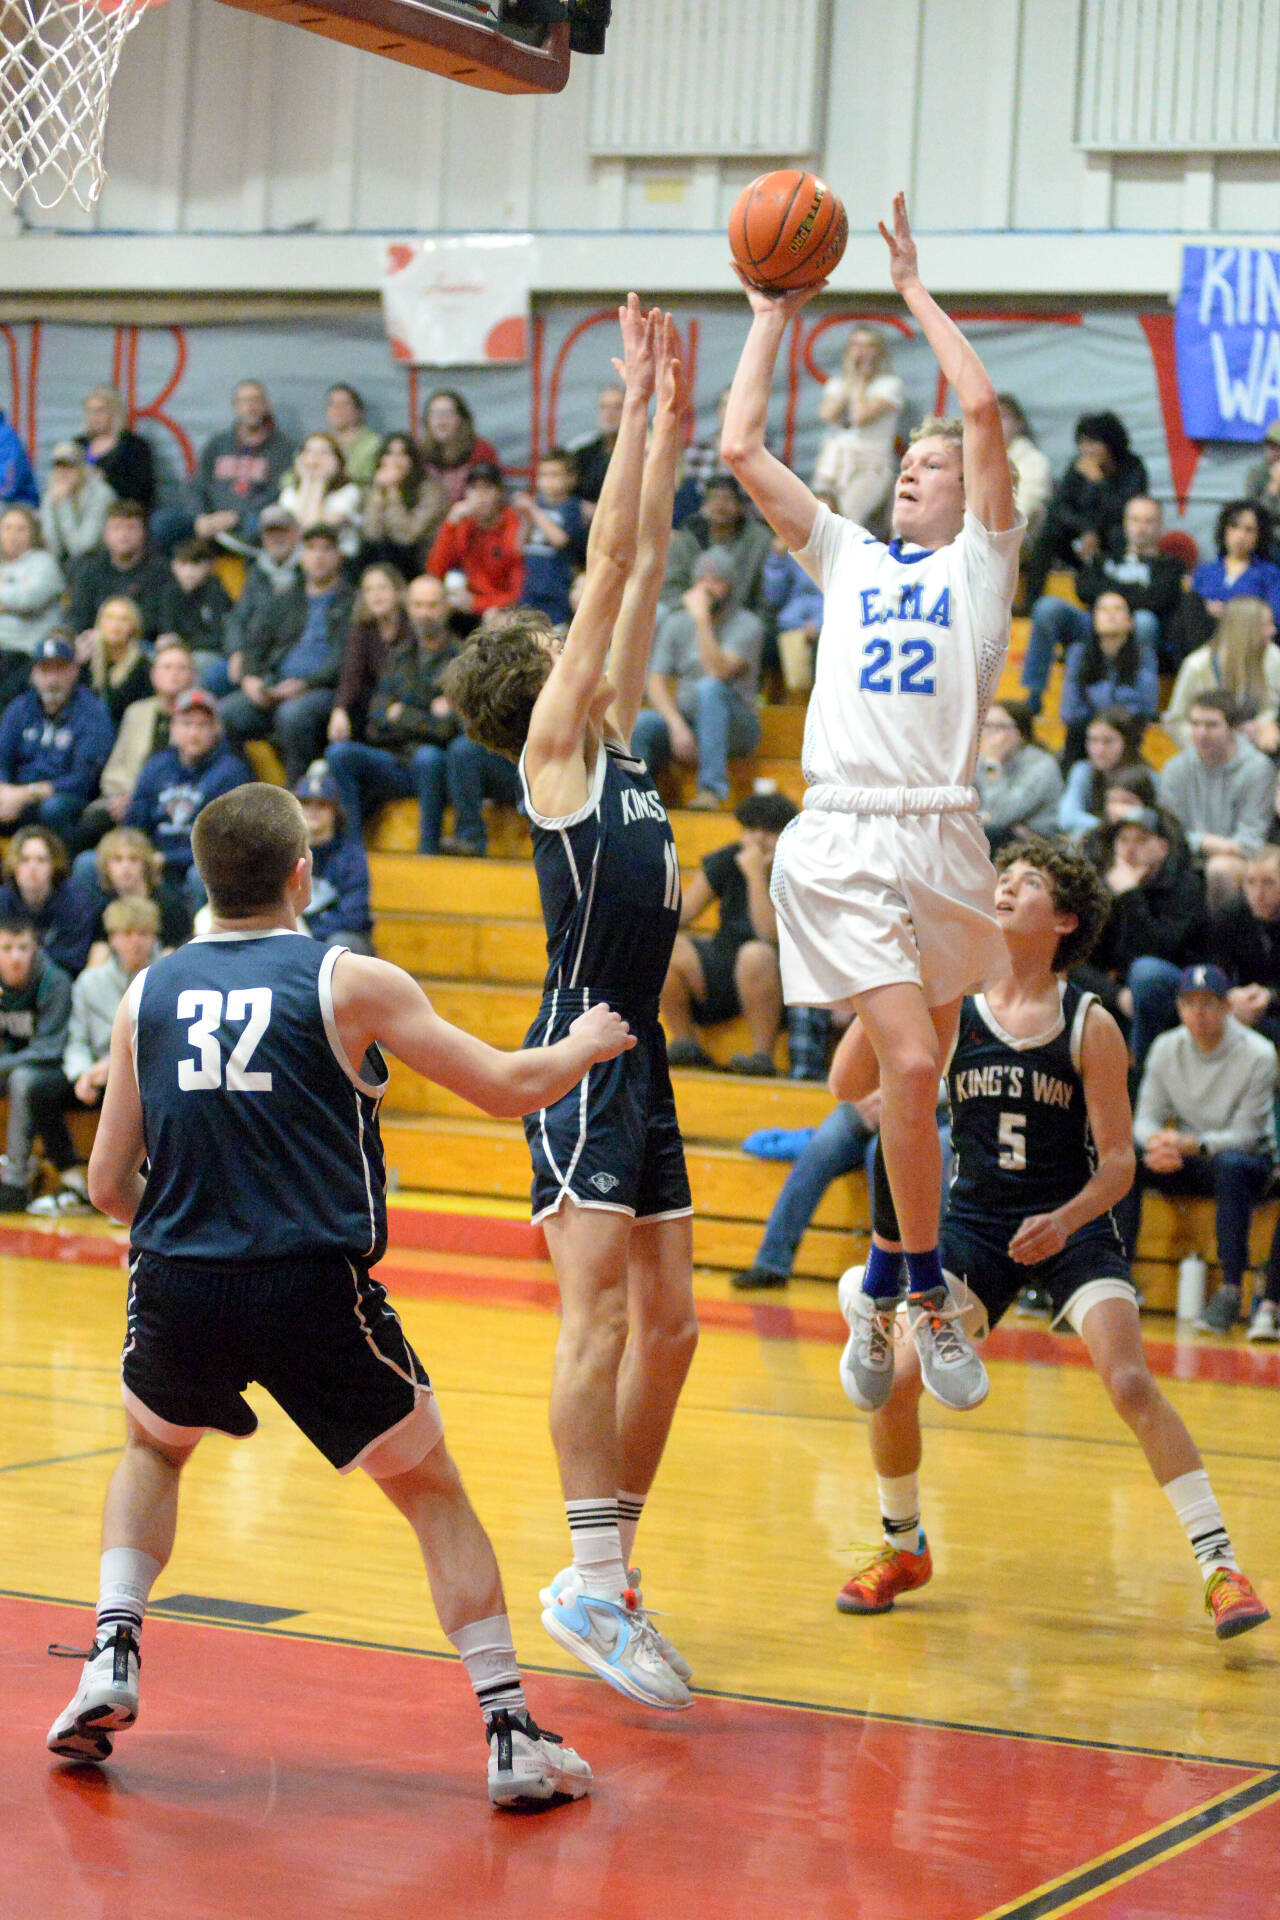 RYAN SPARKS | THE DAILY WORLD Elma guard Cason Seaberg (22) puts up a shot during the Eagles’ 61-53 loss to King’s Way Christian in the 1A District 4 Championship game on Saturday at Castle Rock High School.